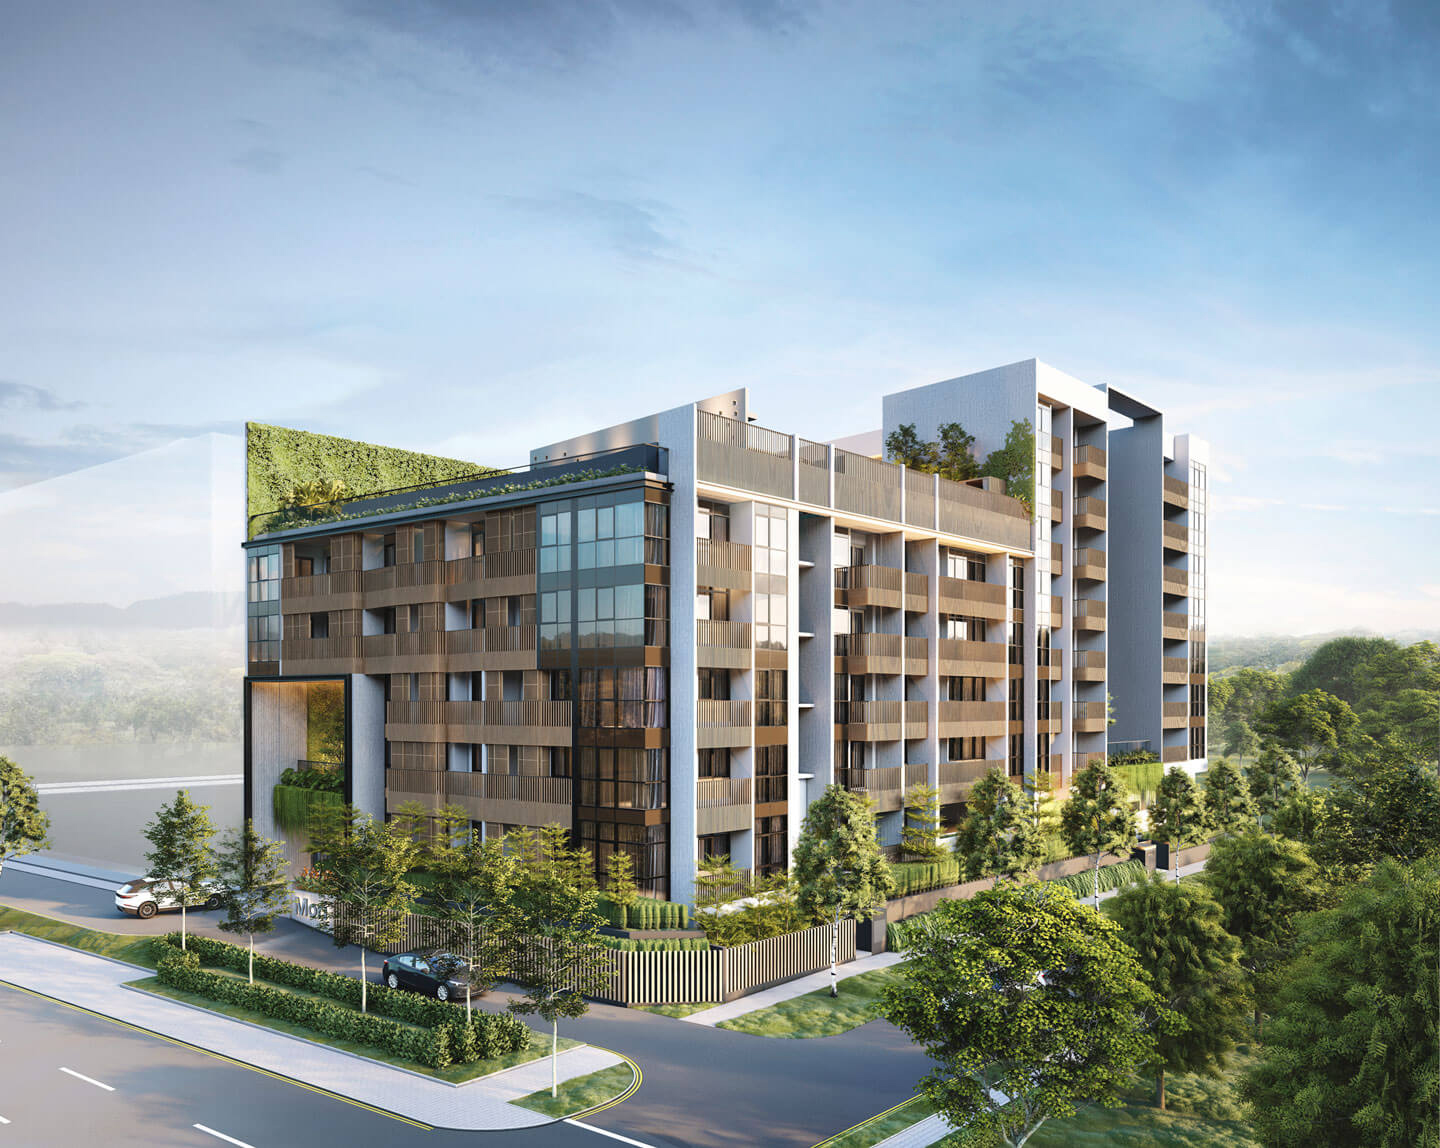 Mori Condo - Freehold Residential development by Roxy Pacific sells 45% of units on launch day